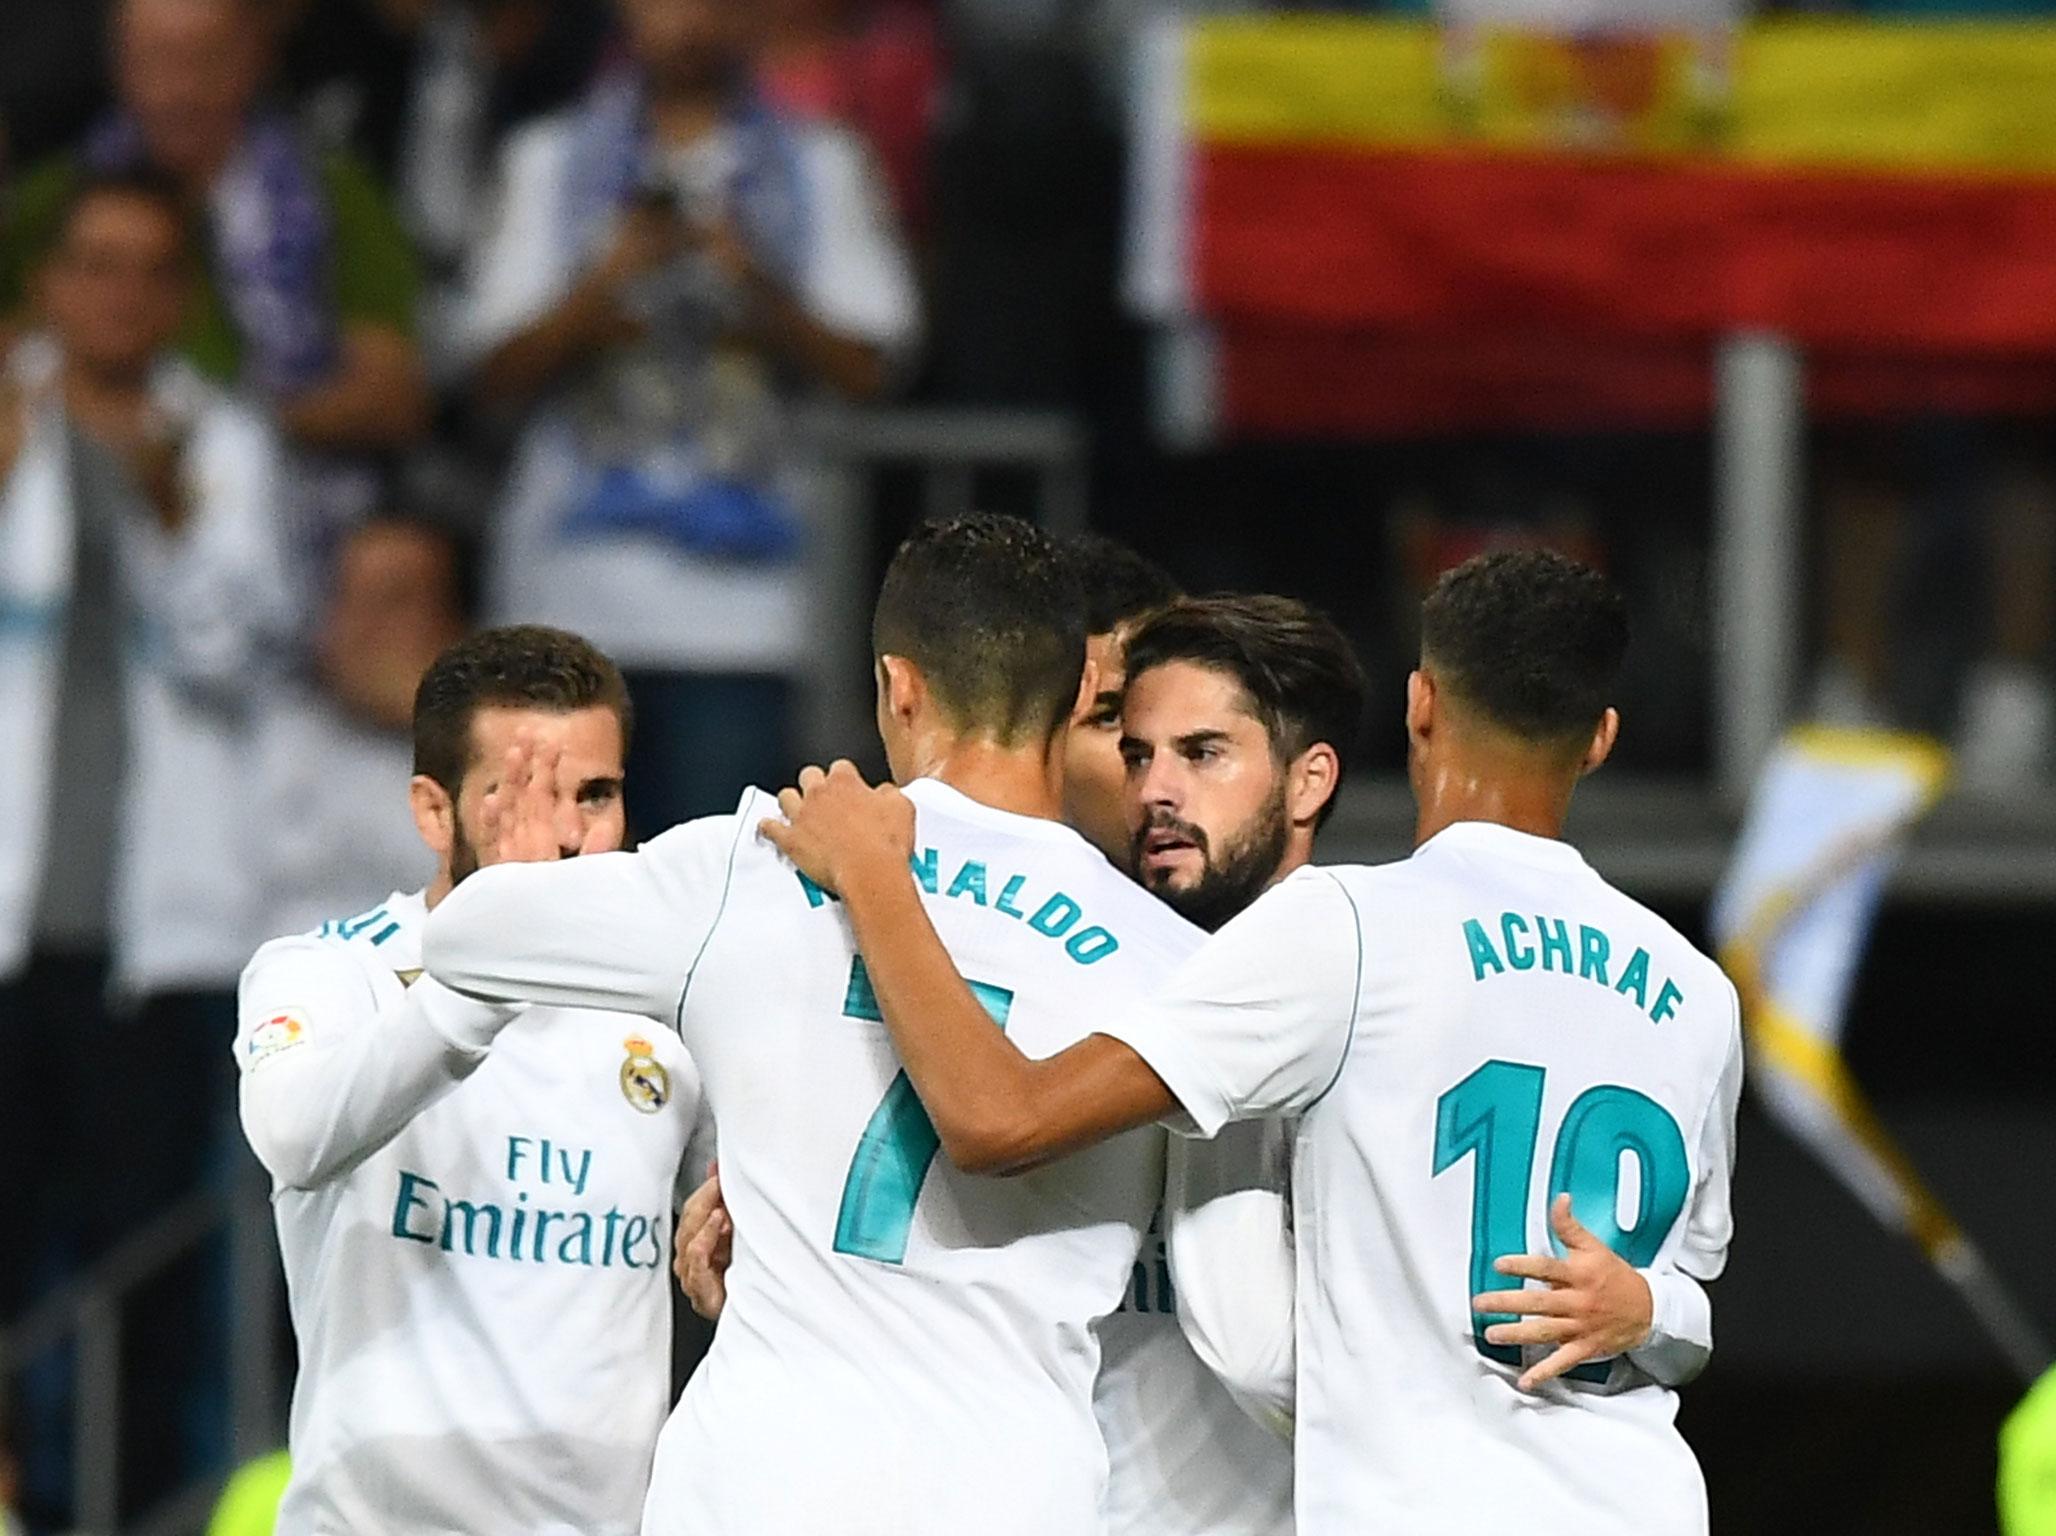 Isco scored both goals as Real finally got a win in front of their own fans